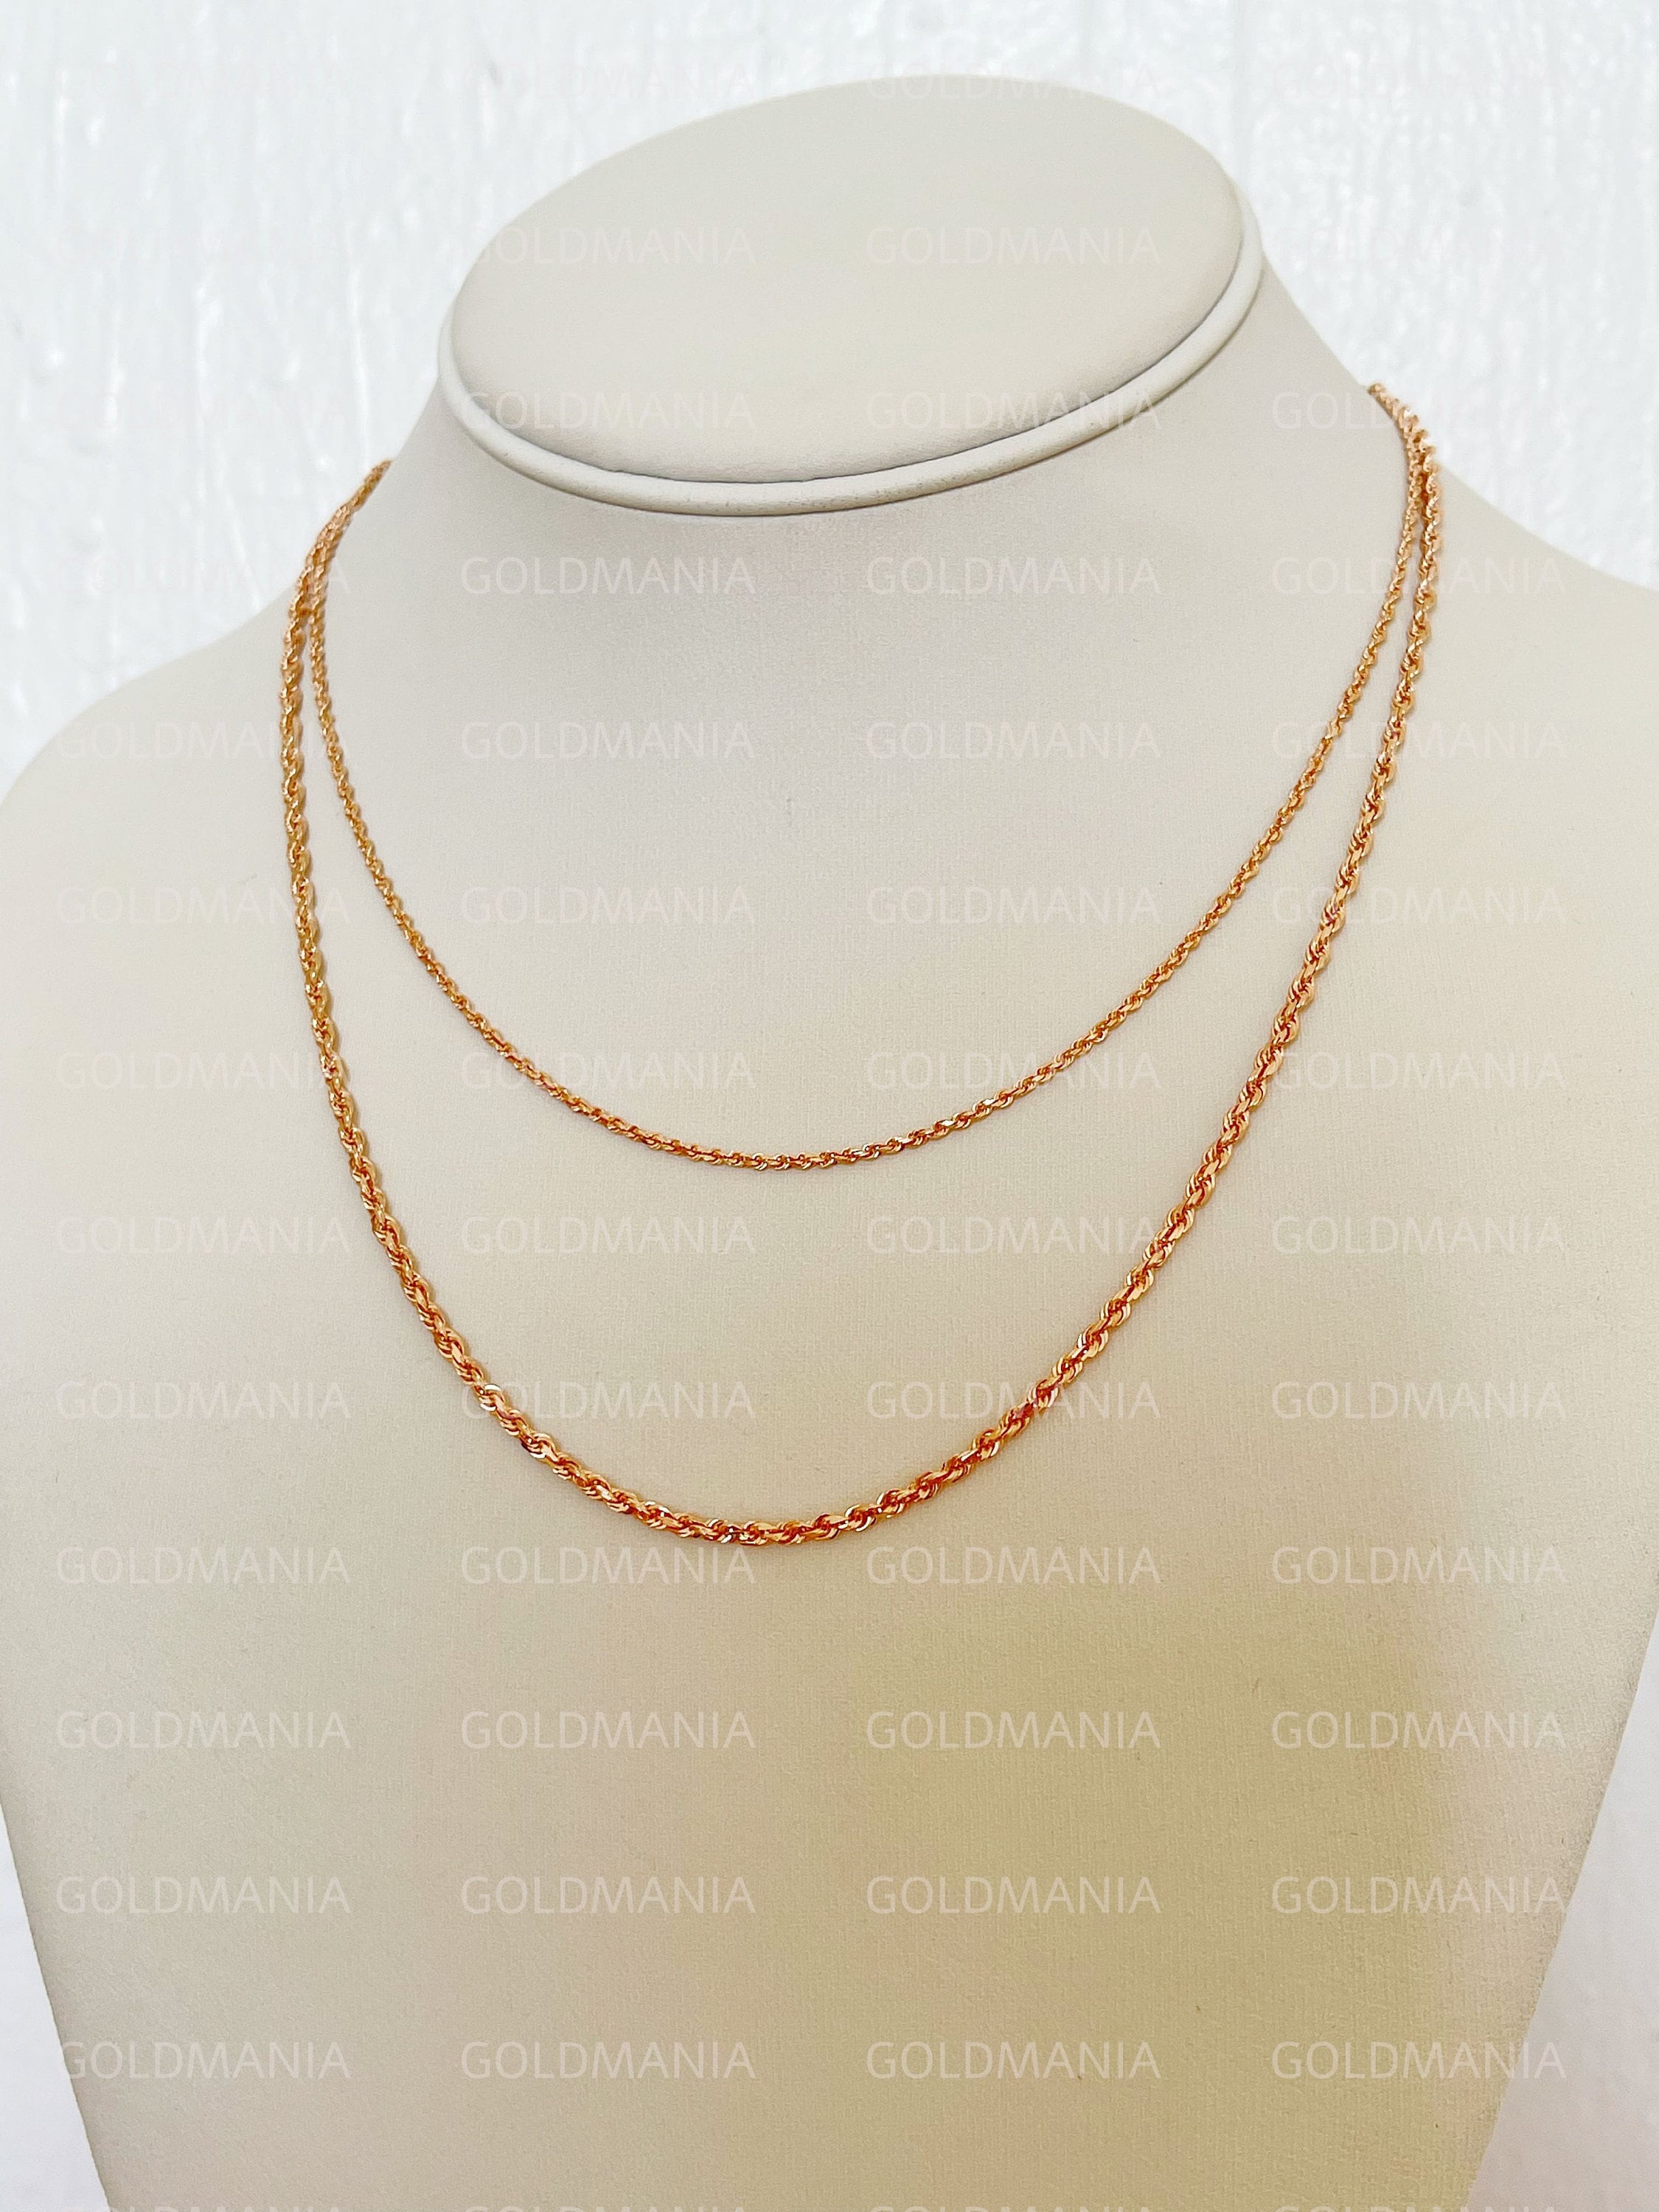 Buy 14k Rose Gold Solid Diamond Cut Rope Chain 18-26 Inches 4mm